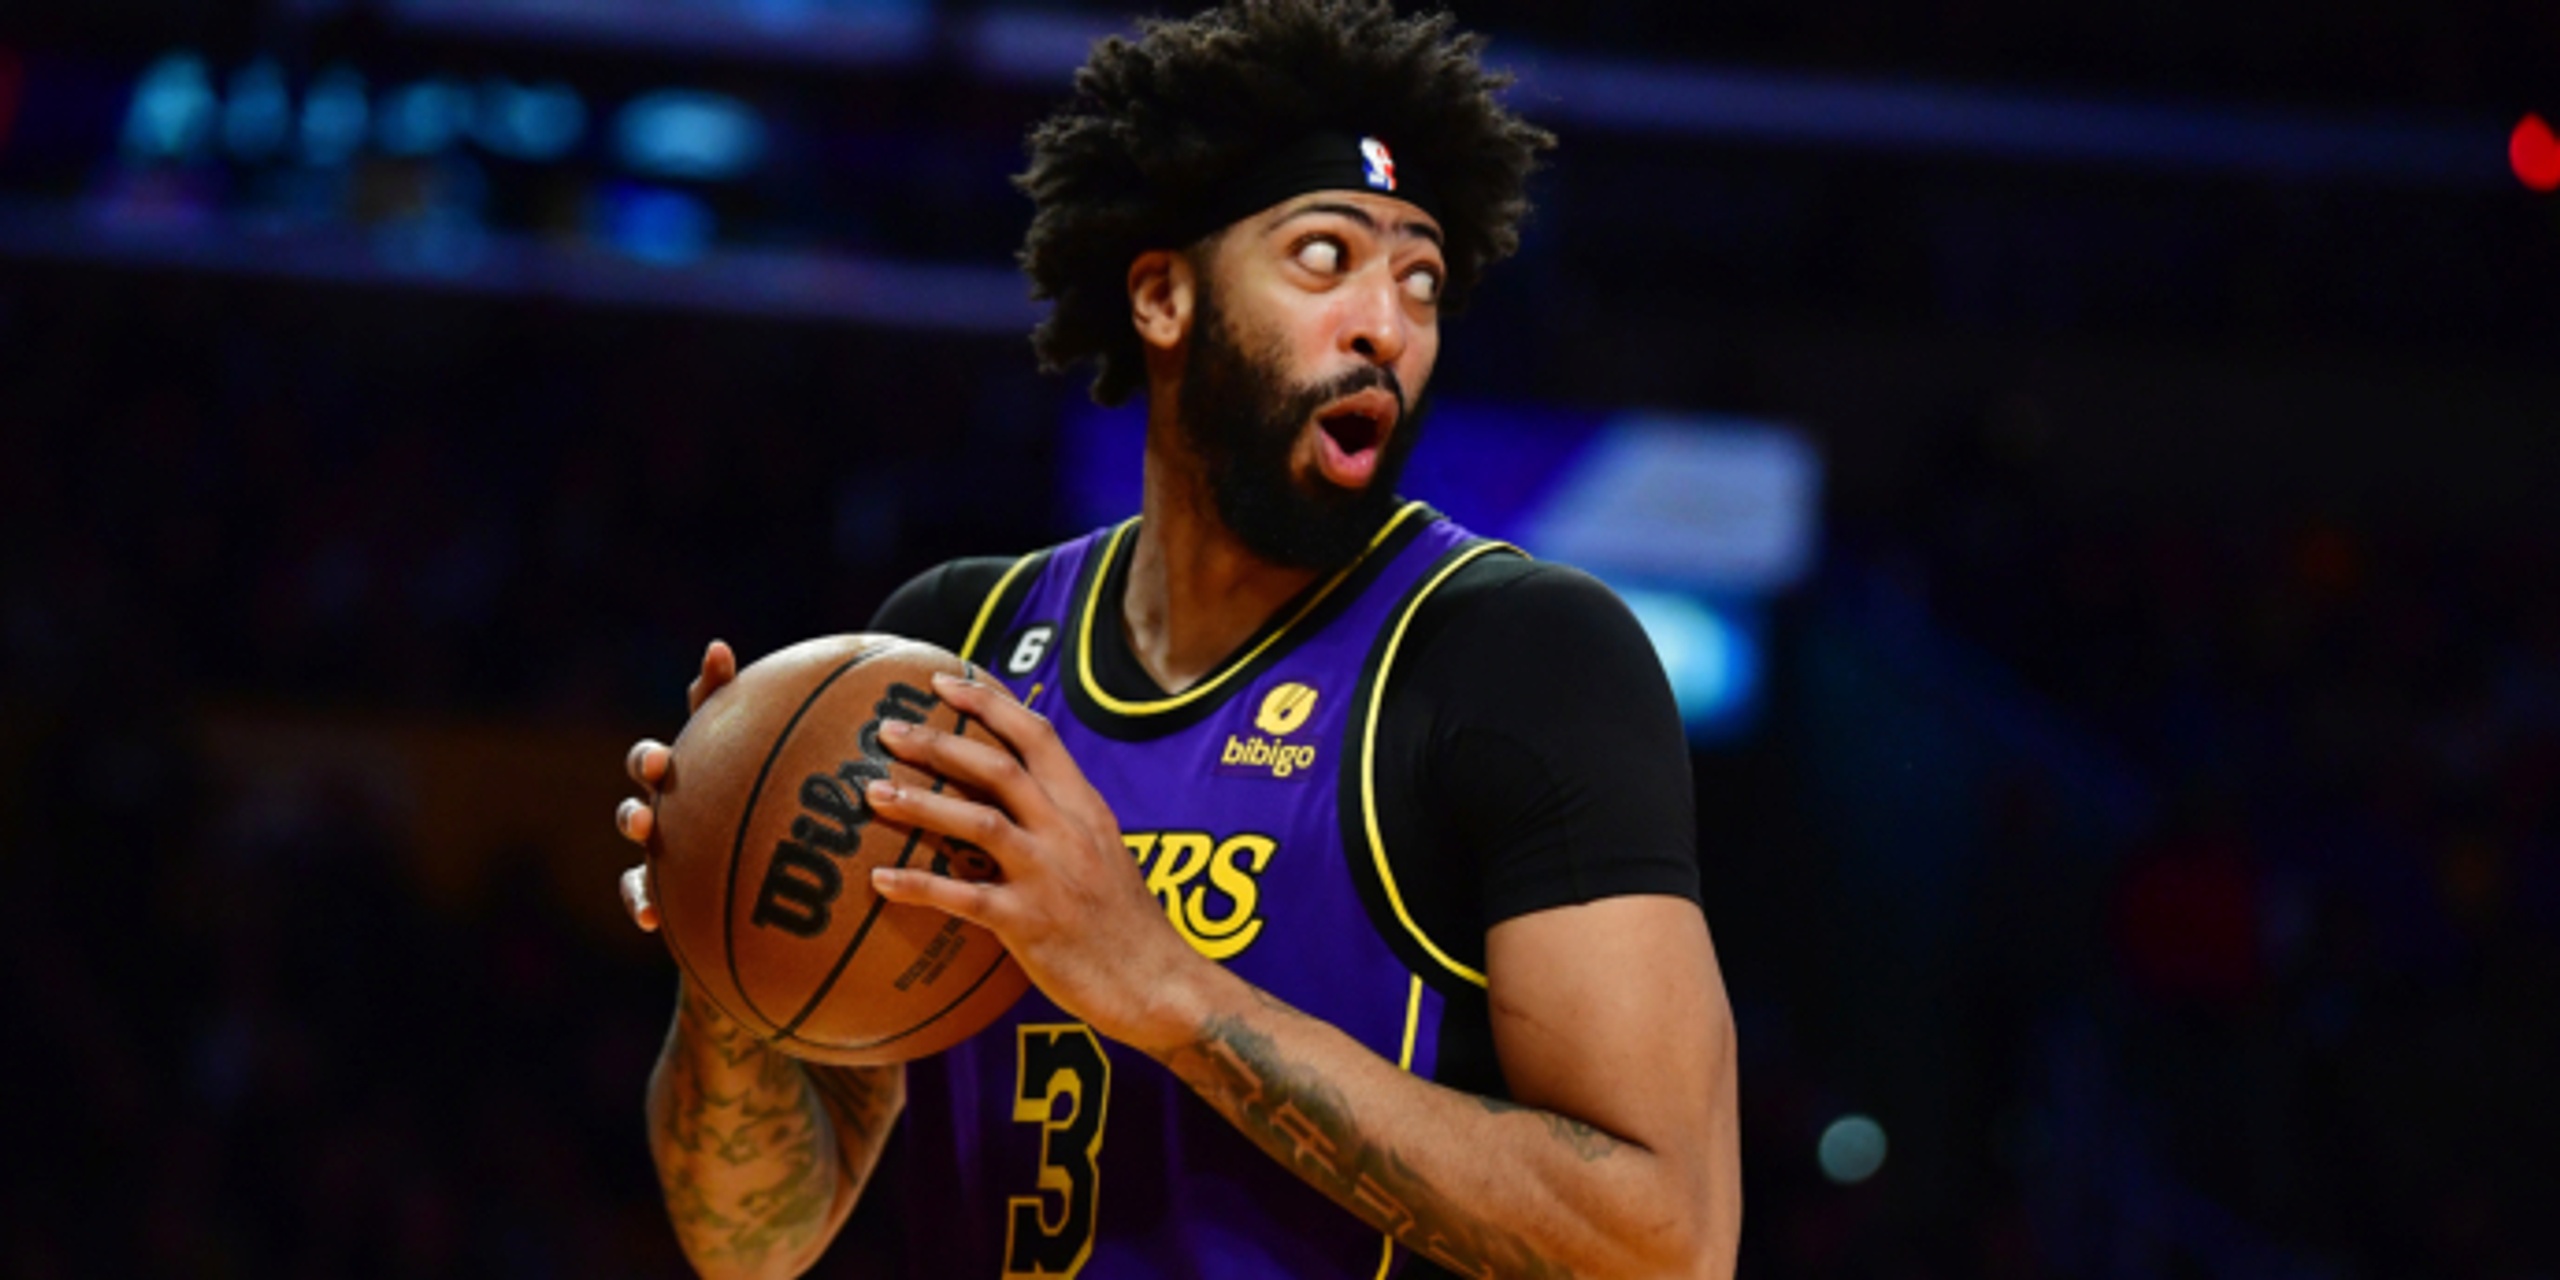 With Anthony Davis owning the paint again, keep your eye on the Lakers